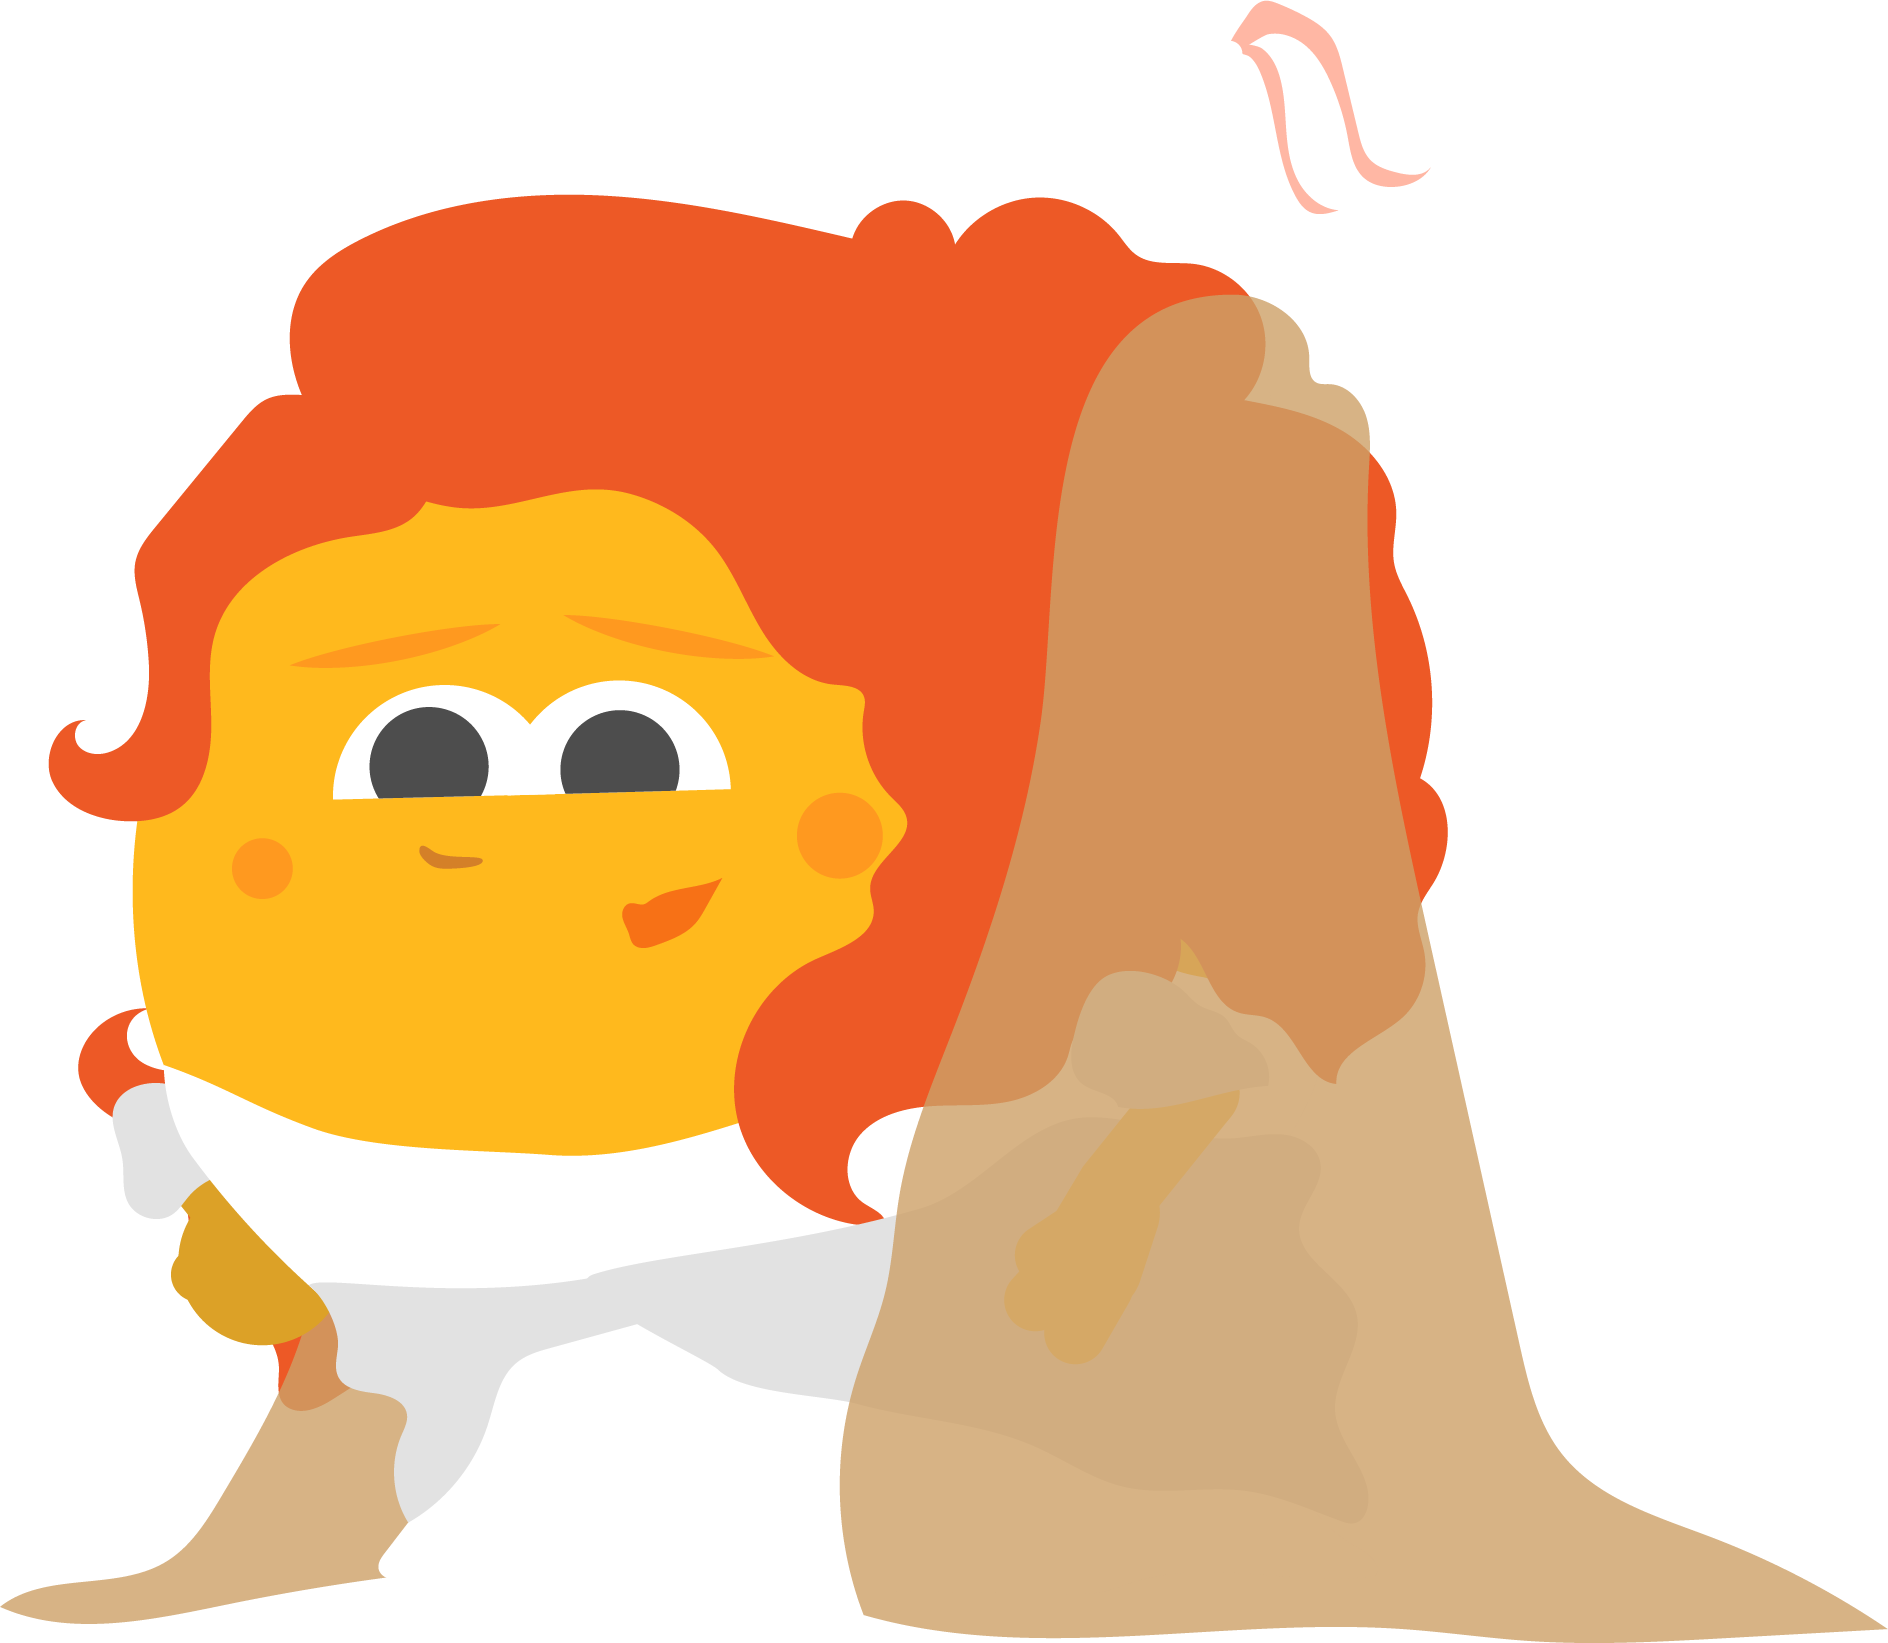 This Is A Sticker Of Buncee Princess - Sticker (1888x1643)